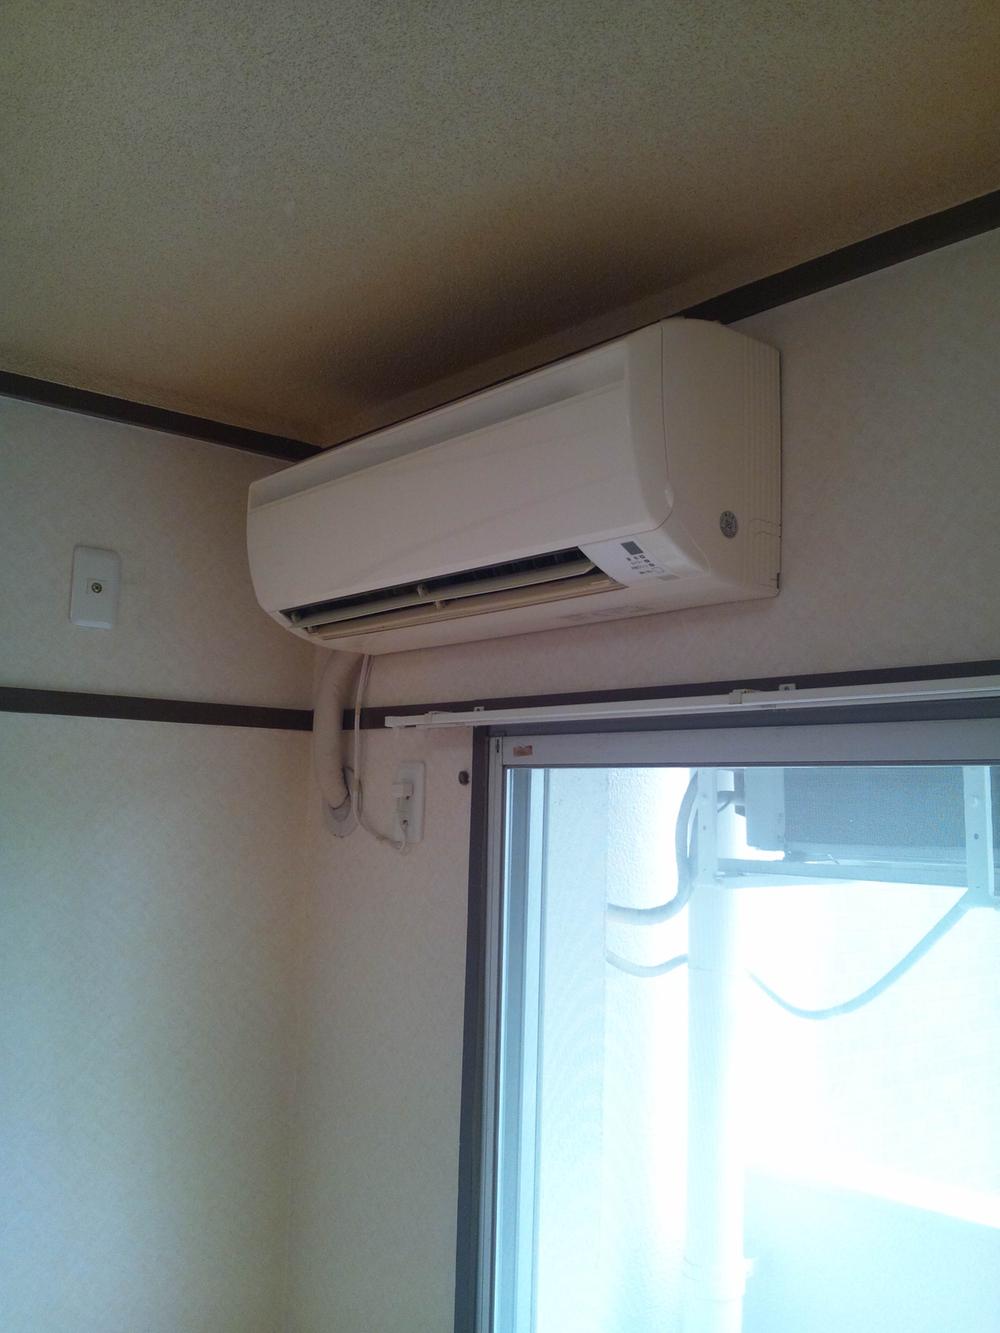 Cooling and heating ・ Air conditioning. Air conditioning is an aircraft standard equipment in the living room